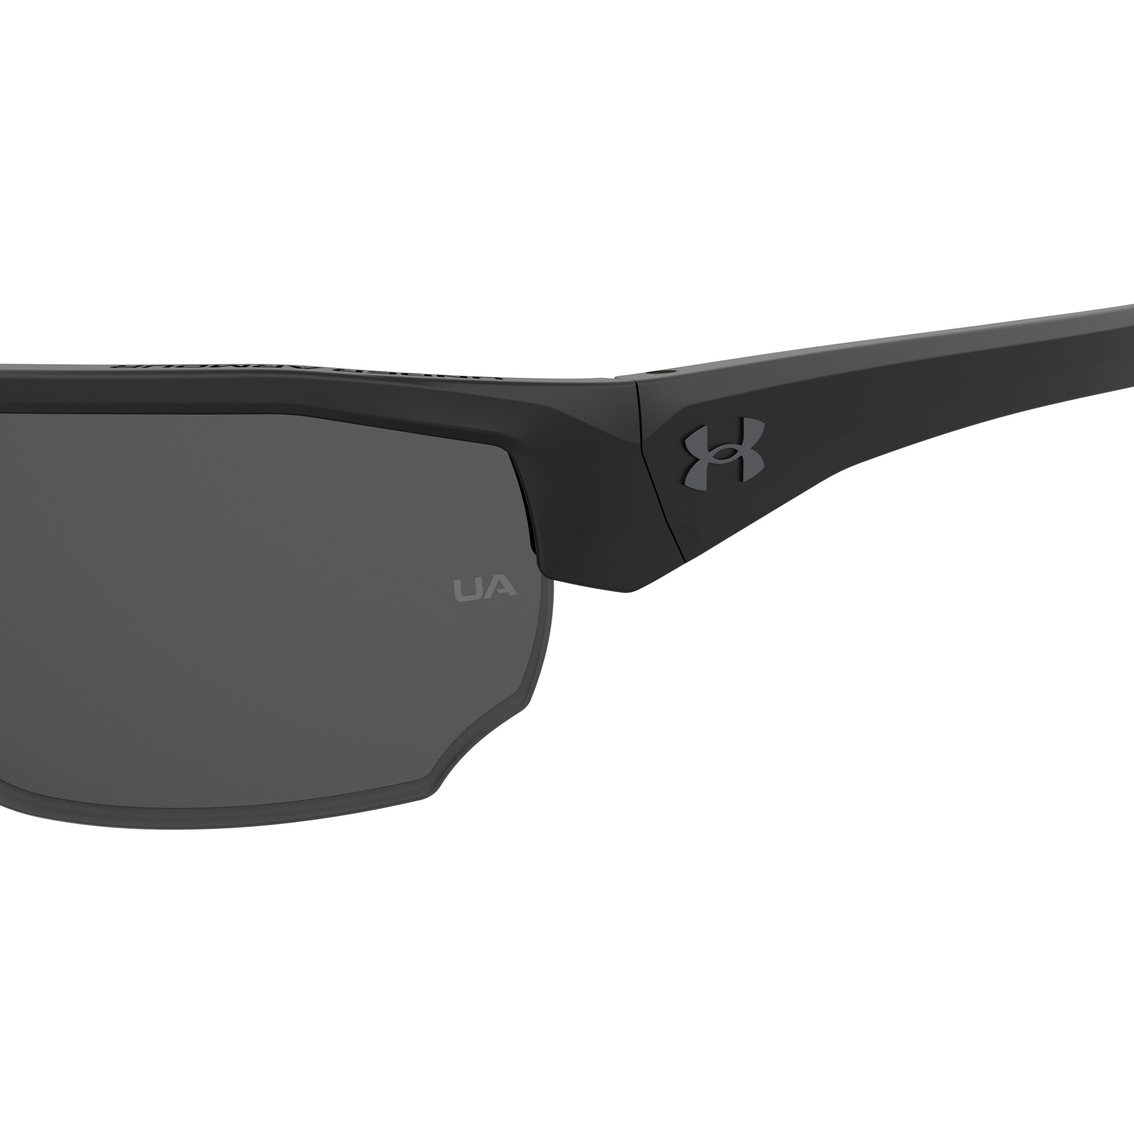 Under Armour Sunglasses - Image 4 of 4